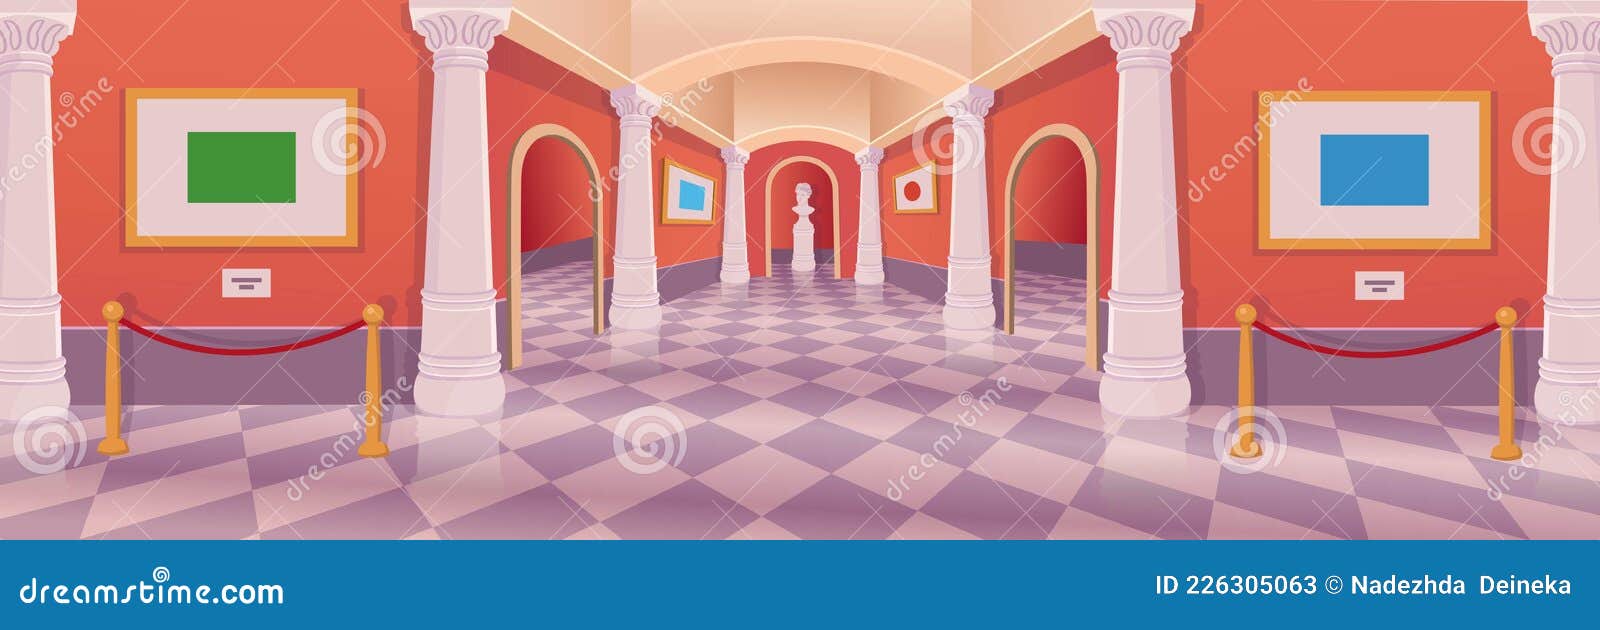 Museum Hall Art Gallery Vector Cartoon Interior Stock Vector - Illustration  of collection, culture: 226305063